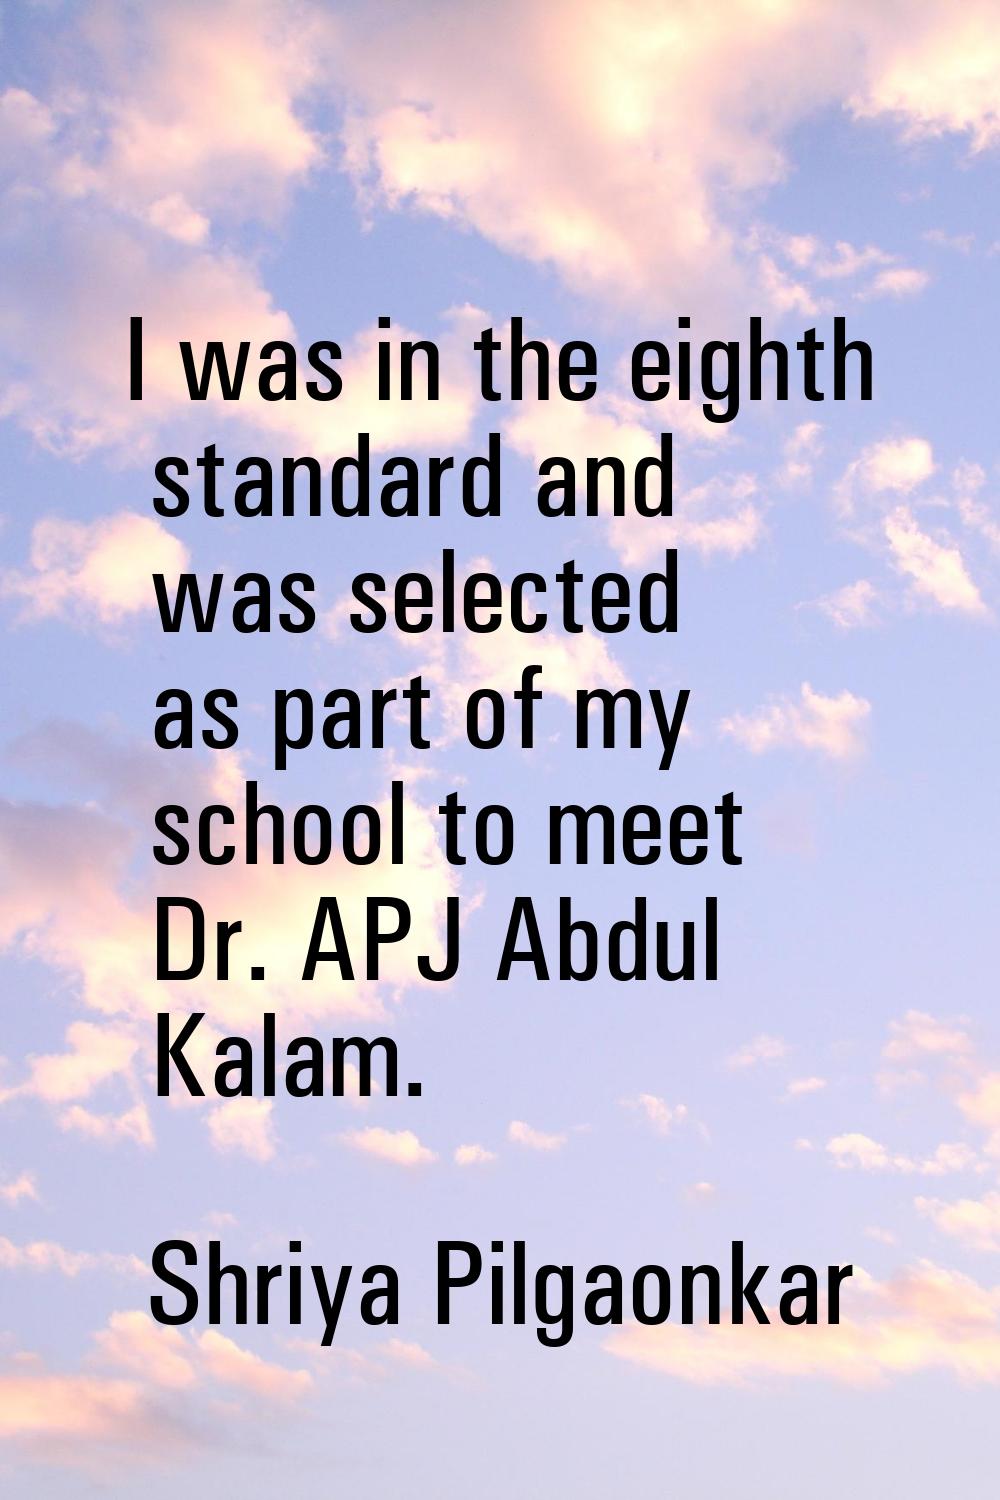 I was in the eighth standard and was selected as part of my school to meet Dr. APJ Abdul Kalam.